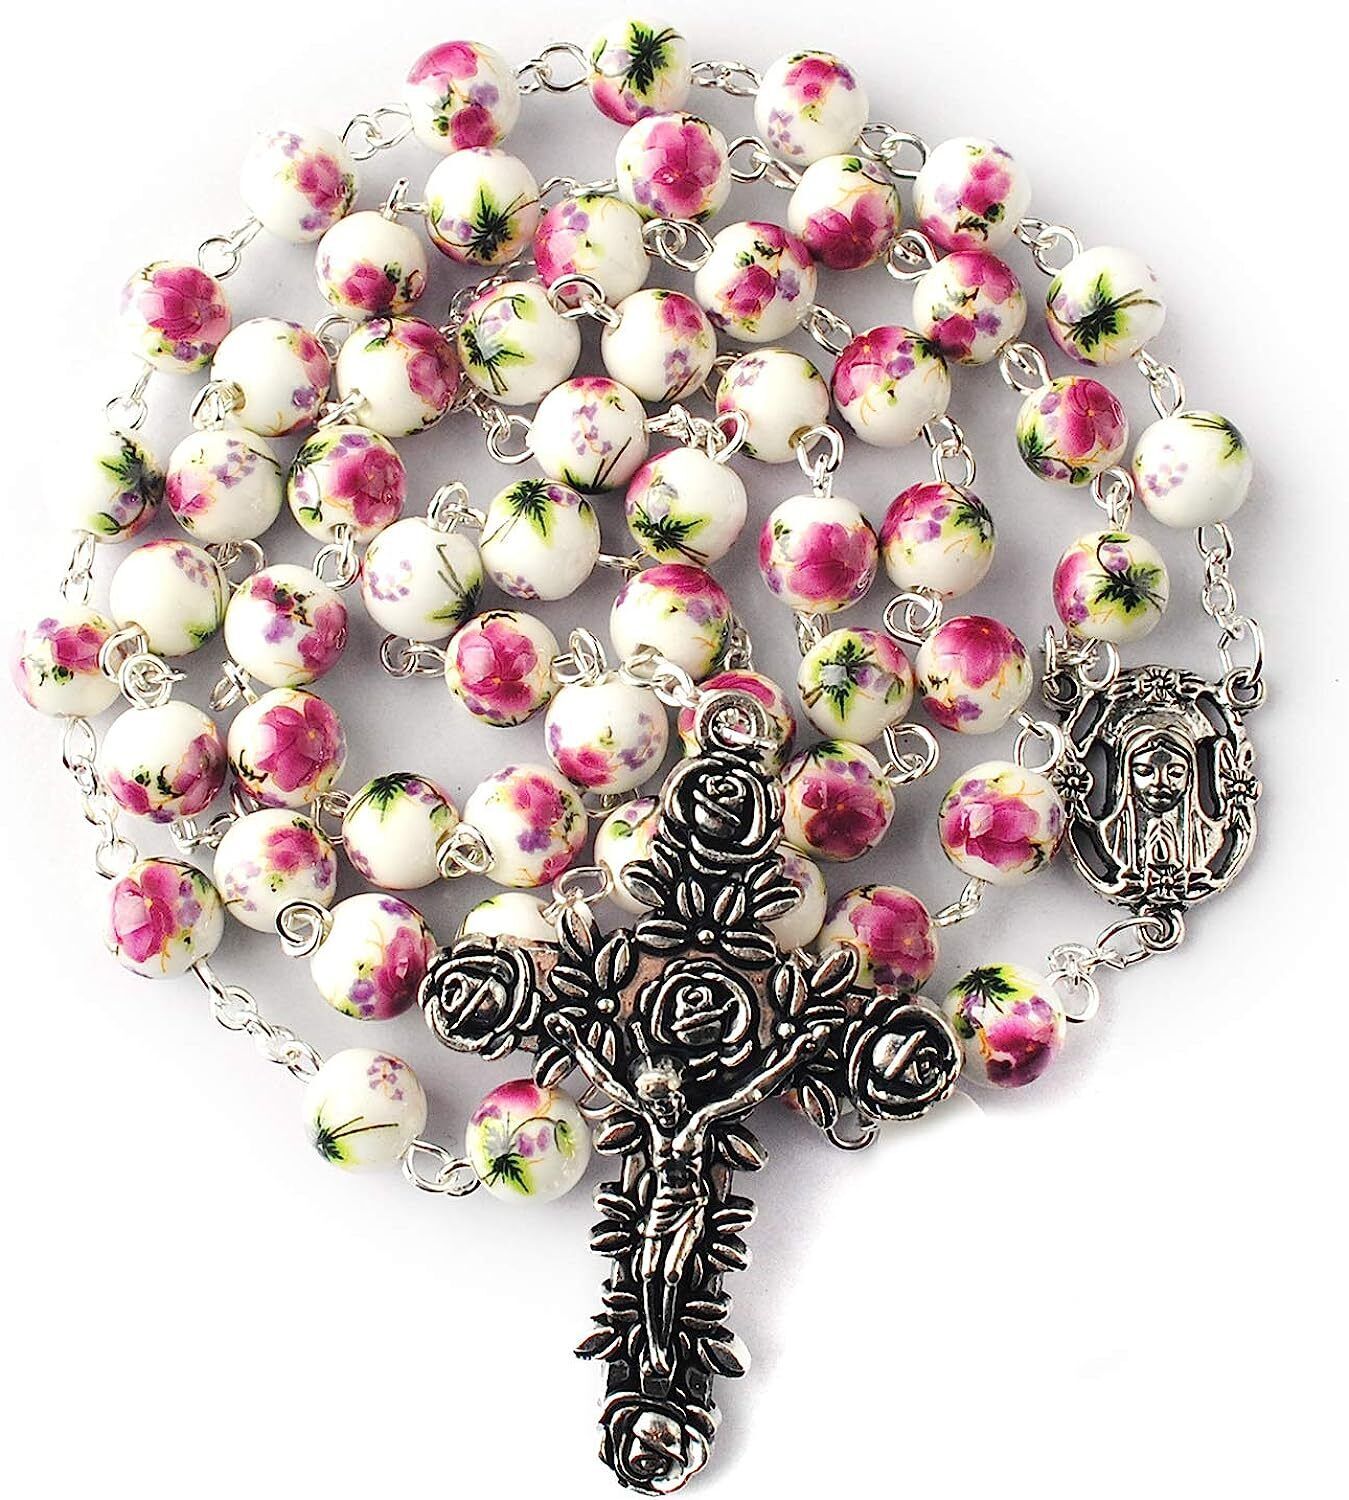 8mm Round Ceramic Beads with Flower Painting Catholic Rosary Necklace